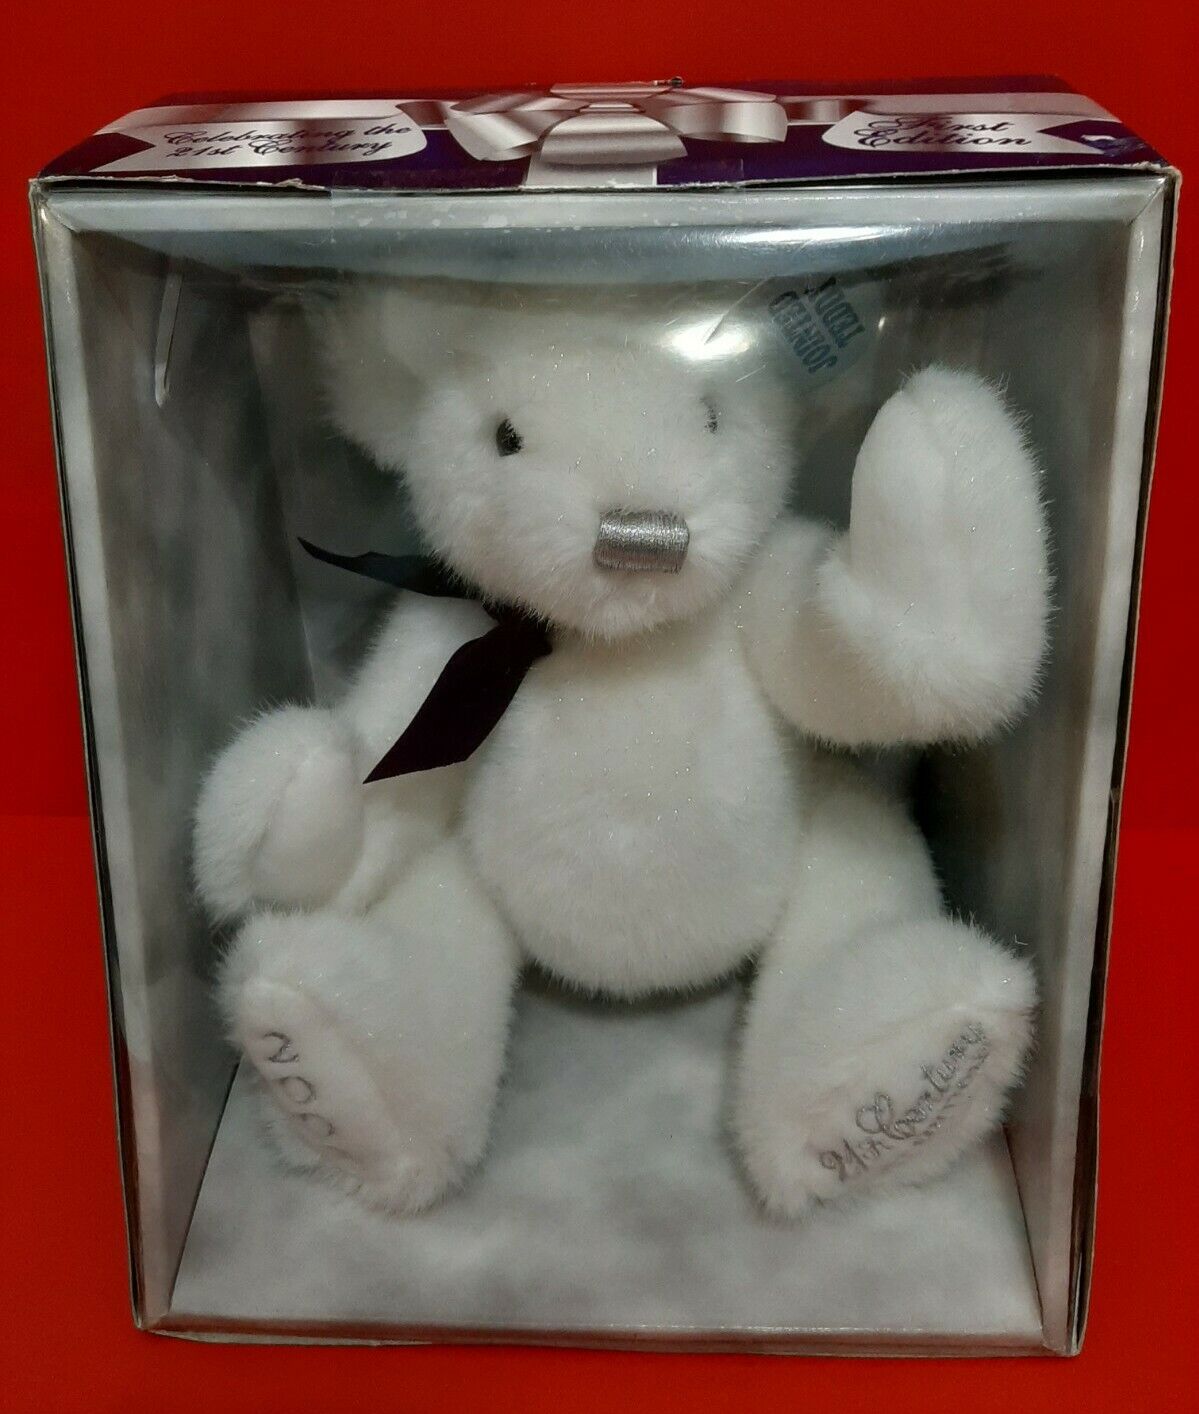 Dan Dee White Plush Bear 2001, 21 st Century First Edition Jointed Teddy Silver.